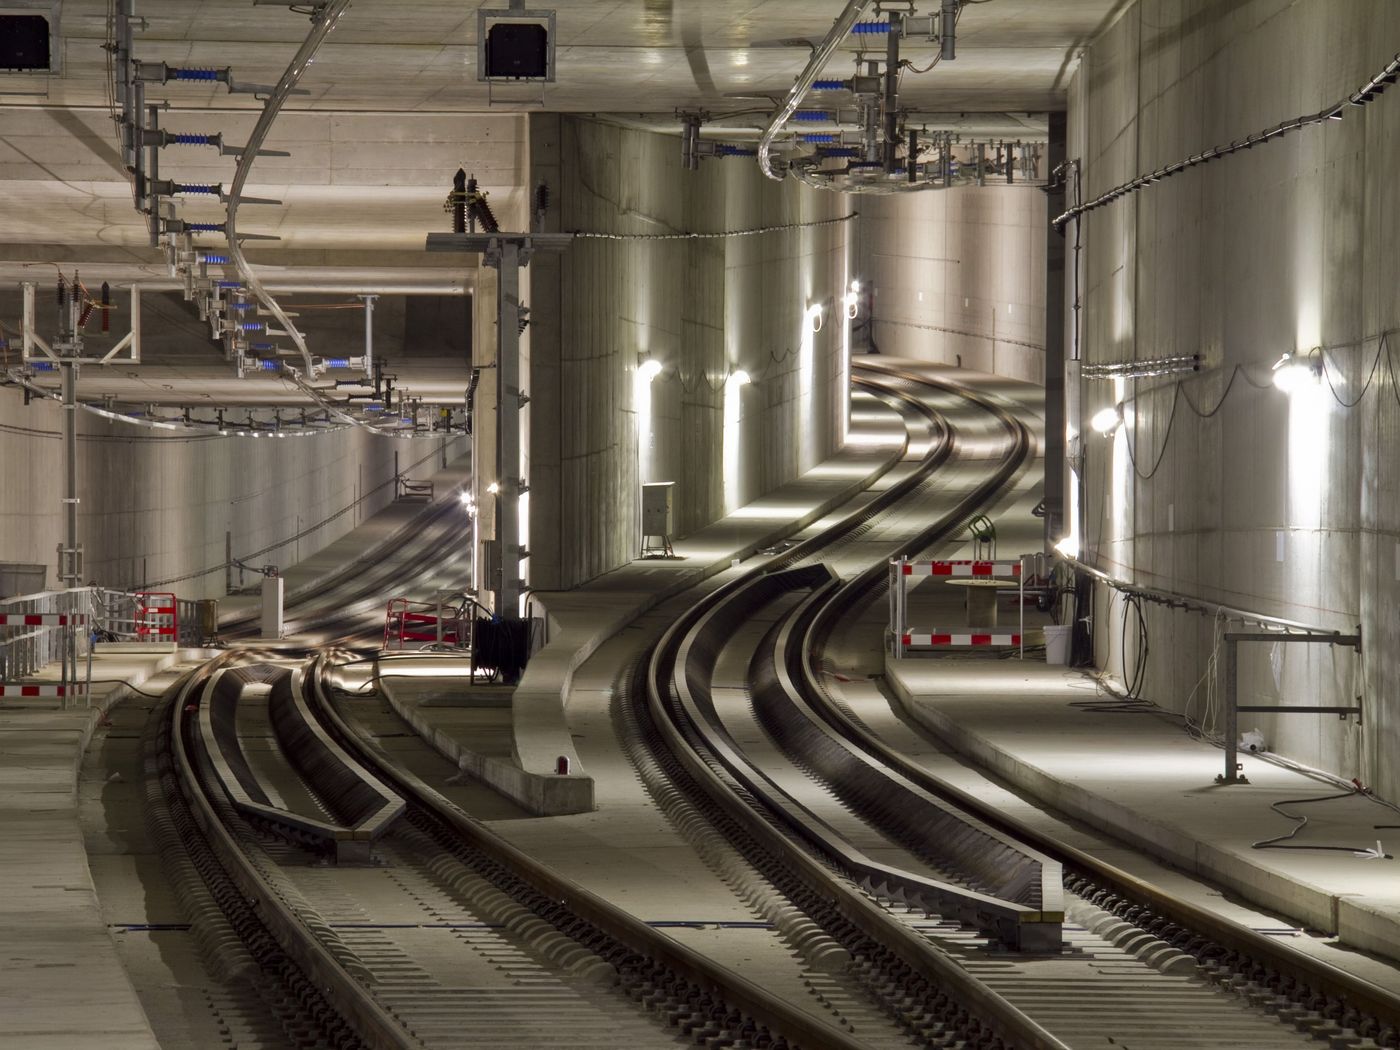 PohlCon product solutions by our brand JORDAHL® for the Leipziger city tunnel project